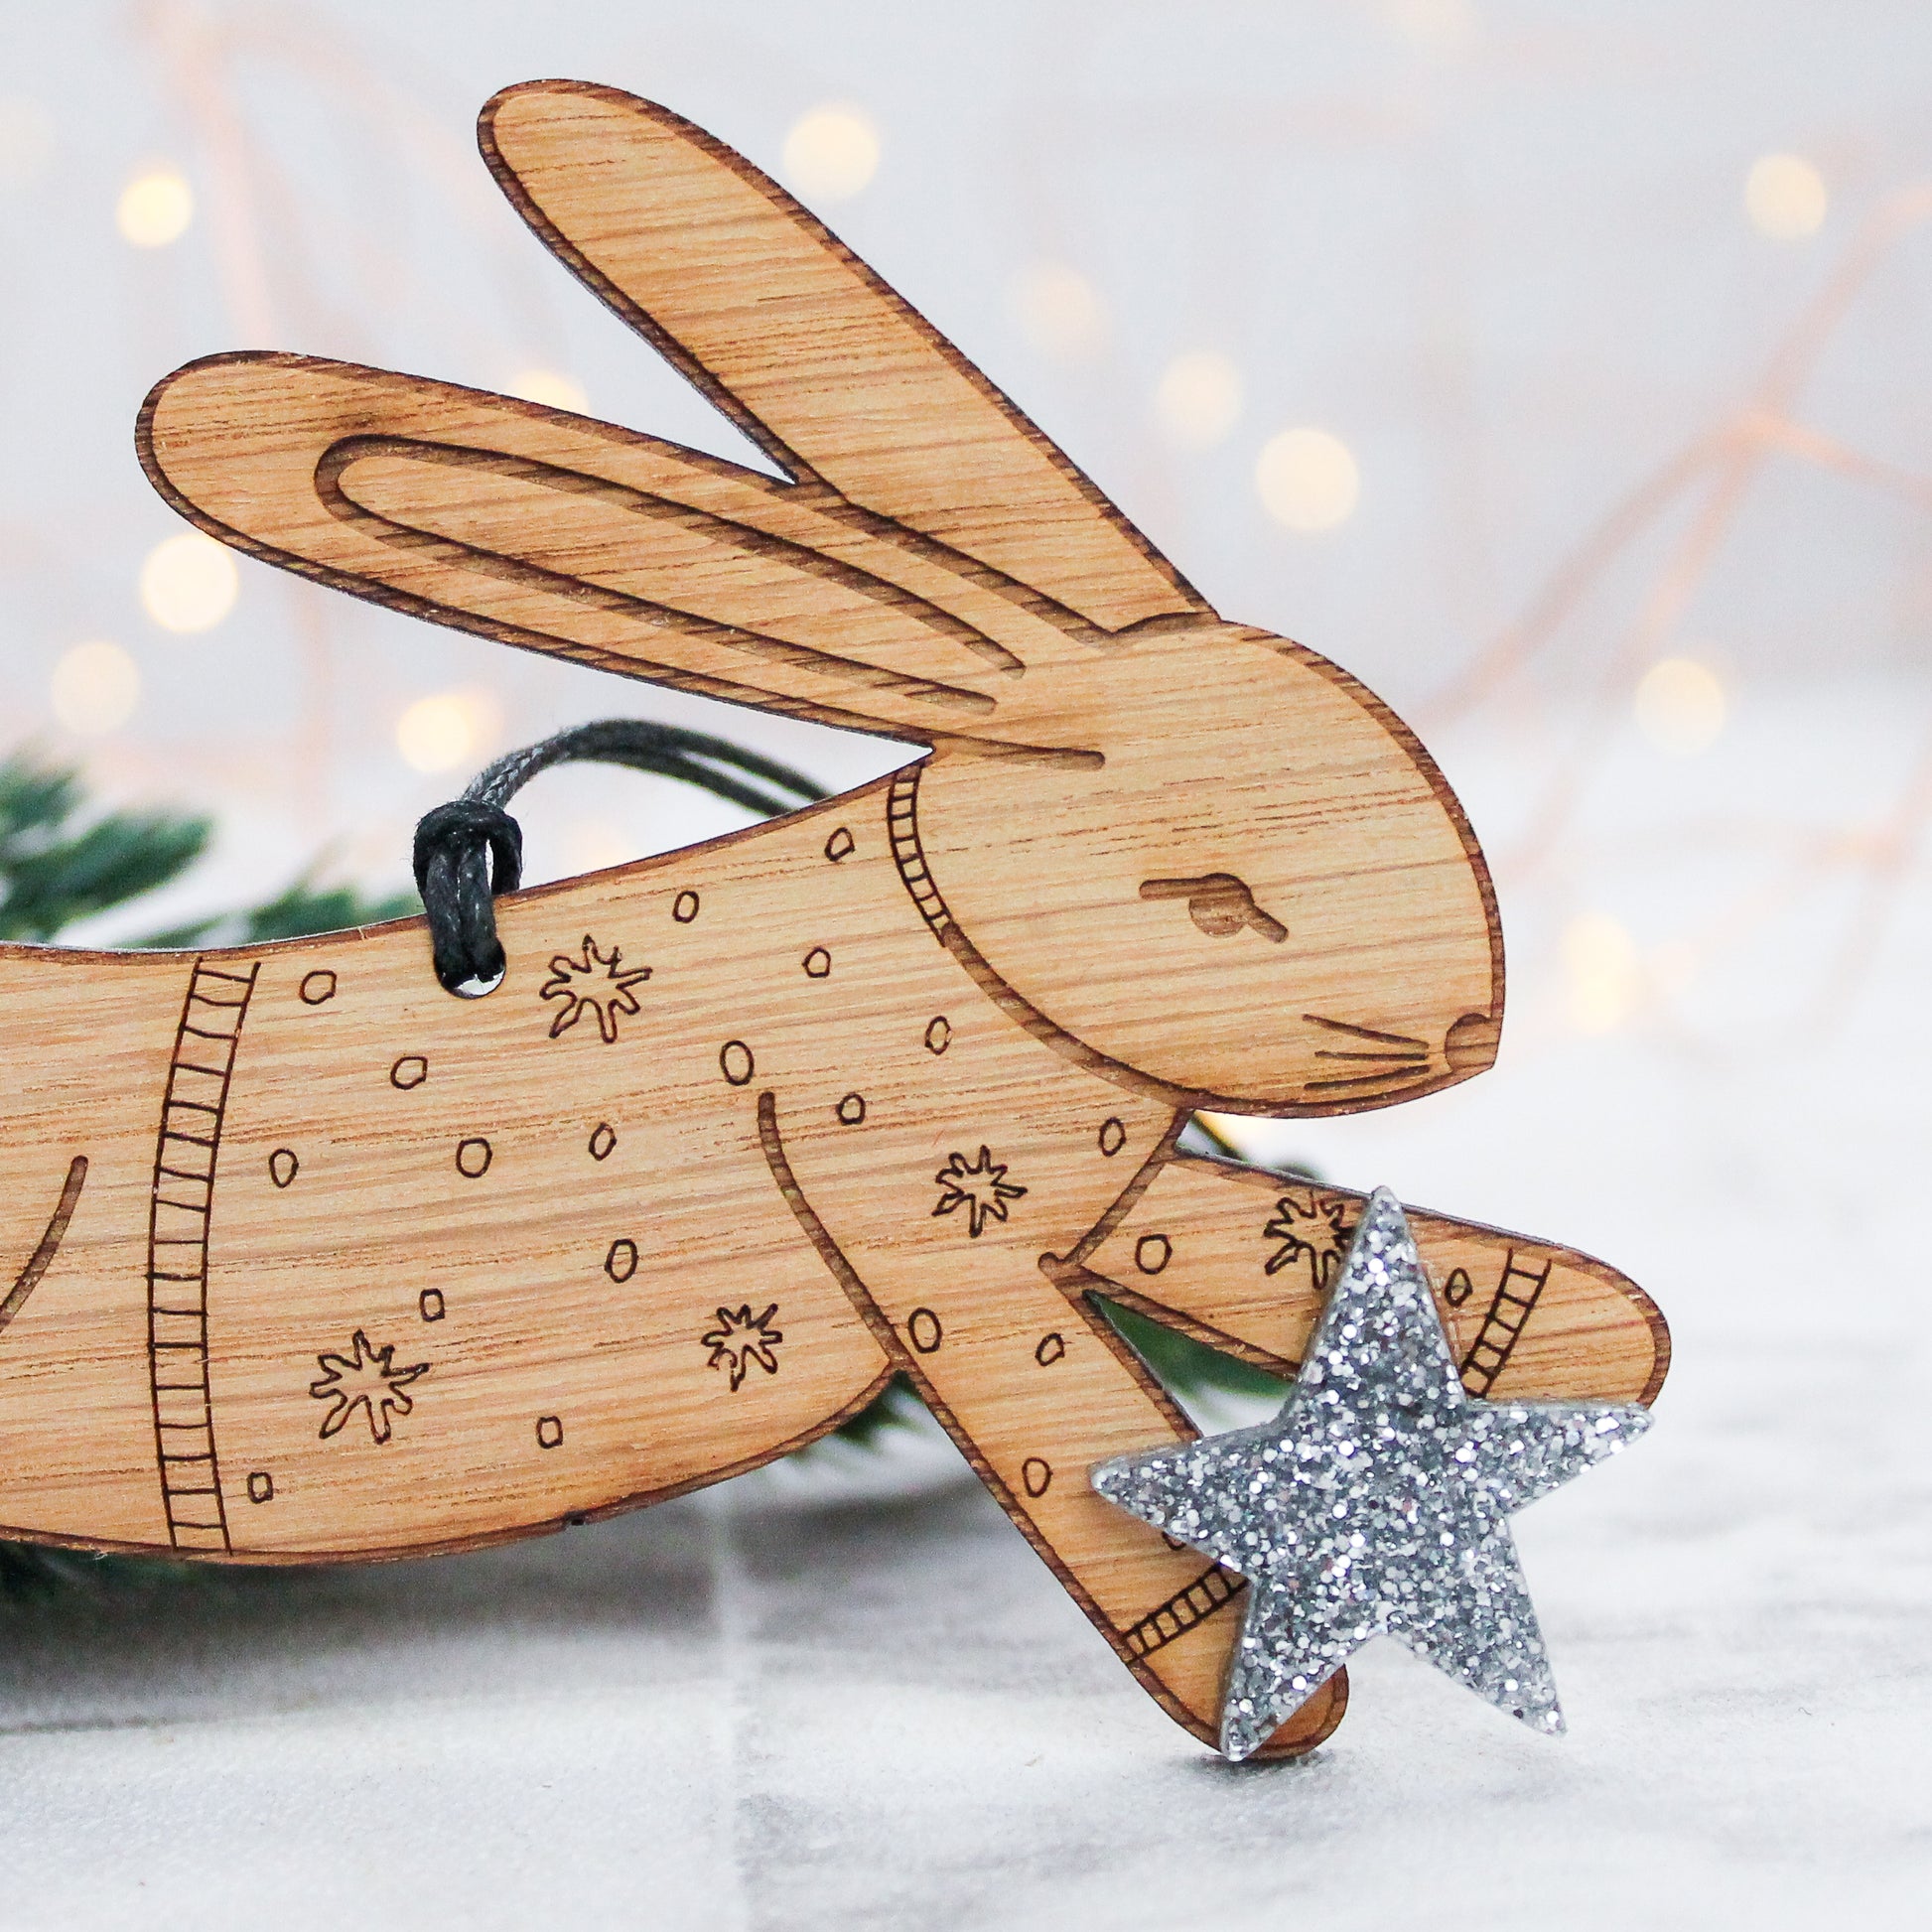 wooden rabbit Christmas tree decoration in winter jumper and holding a silver star